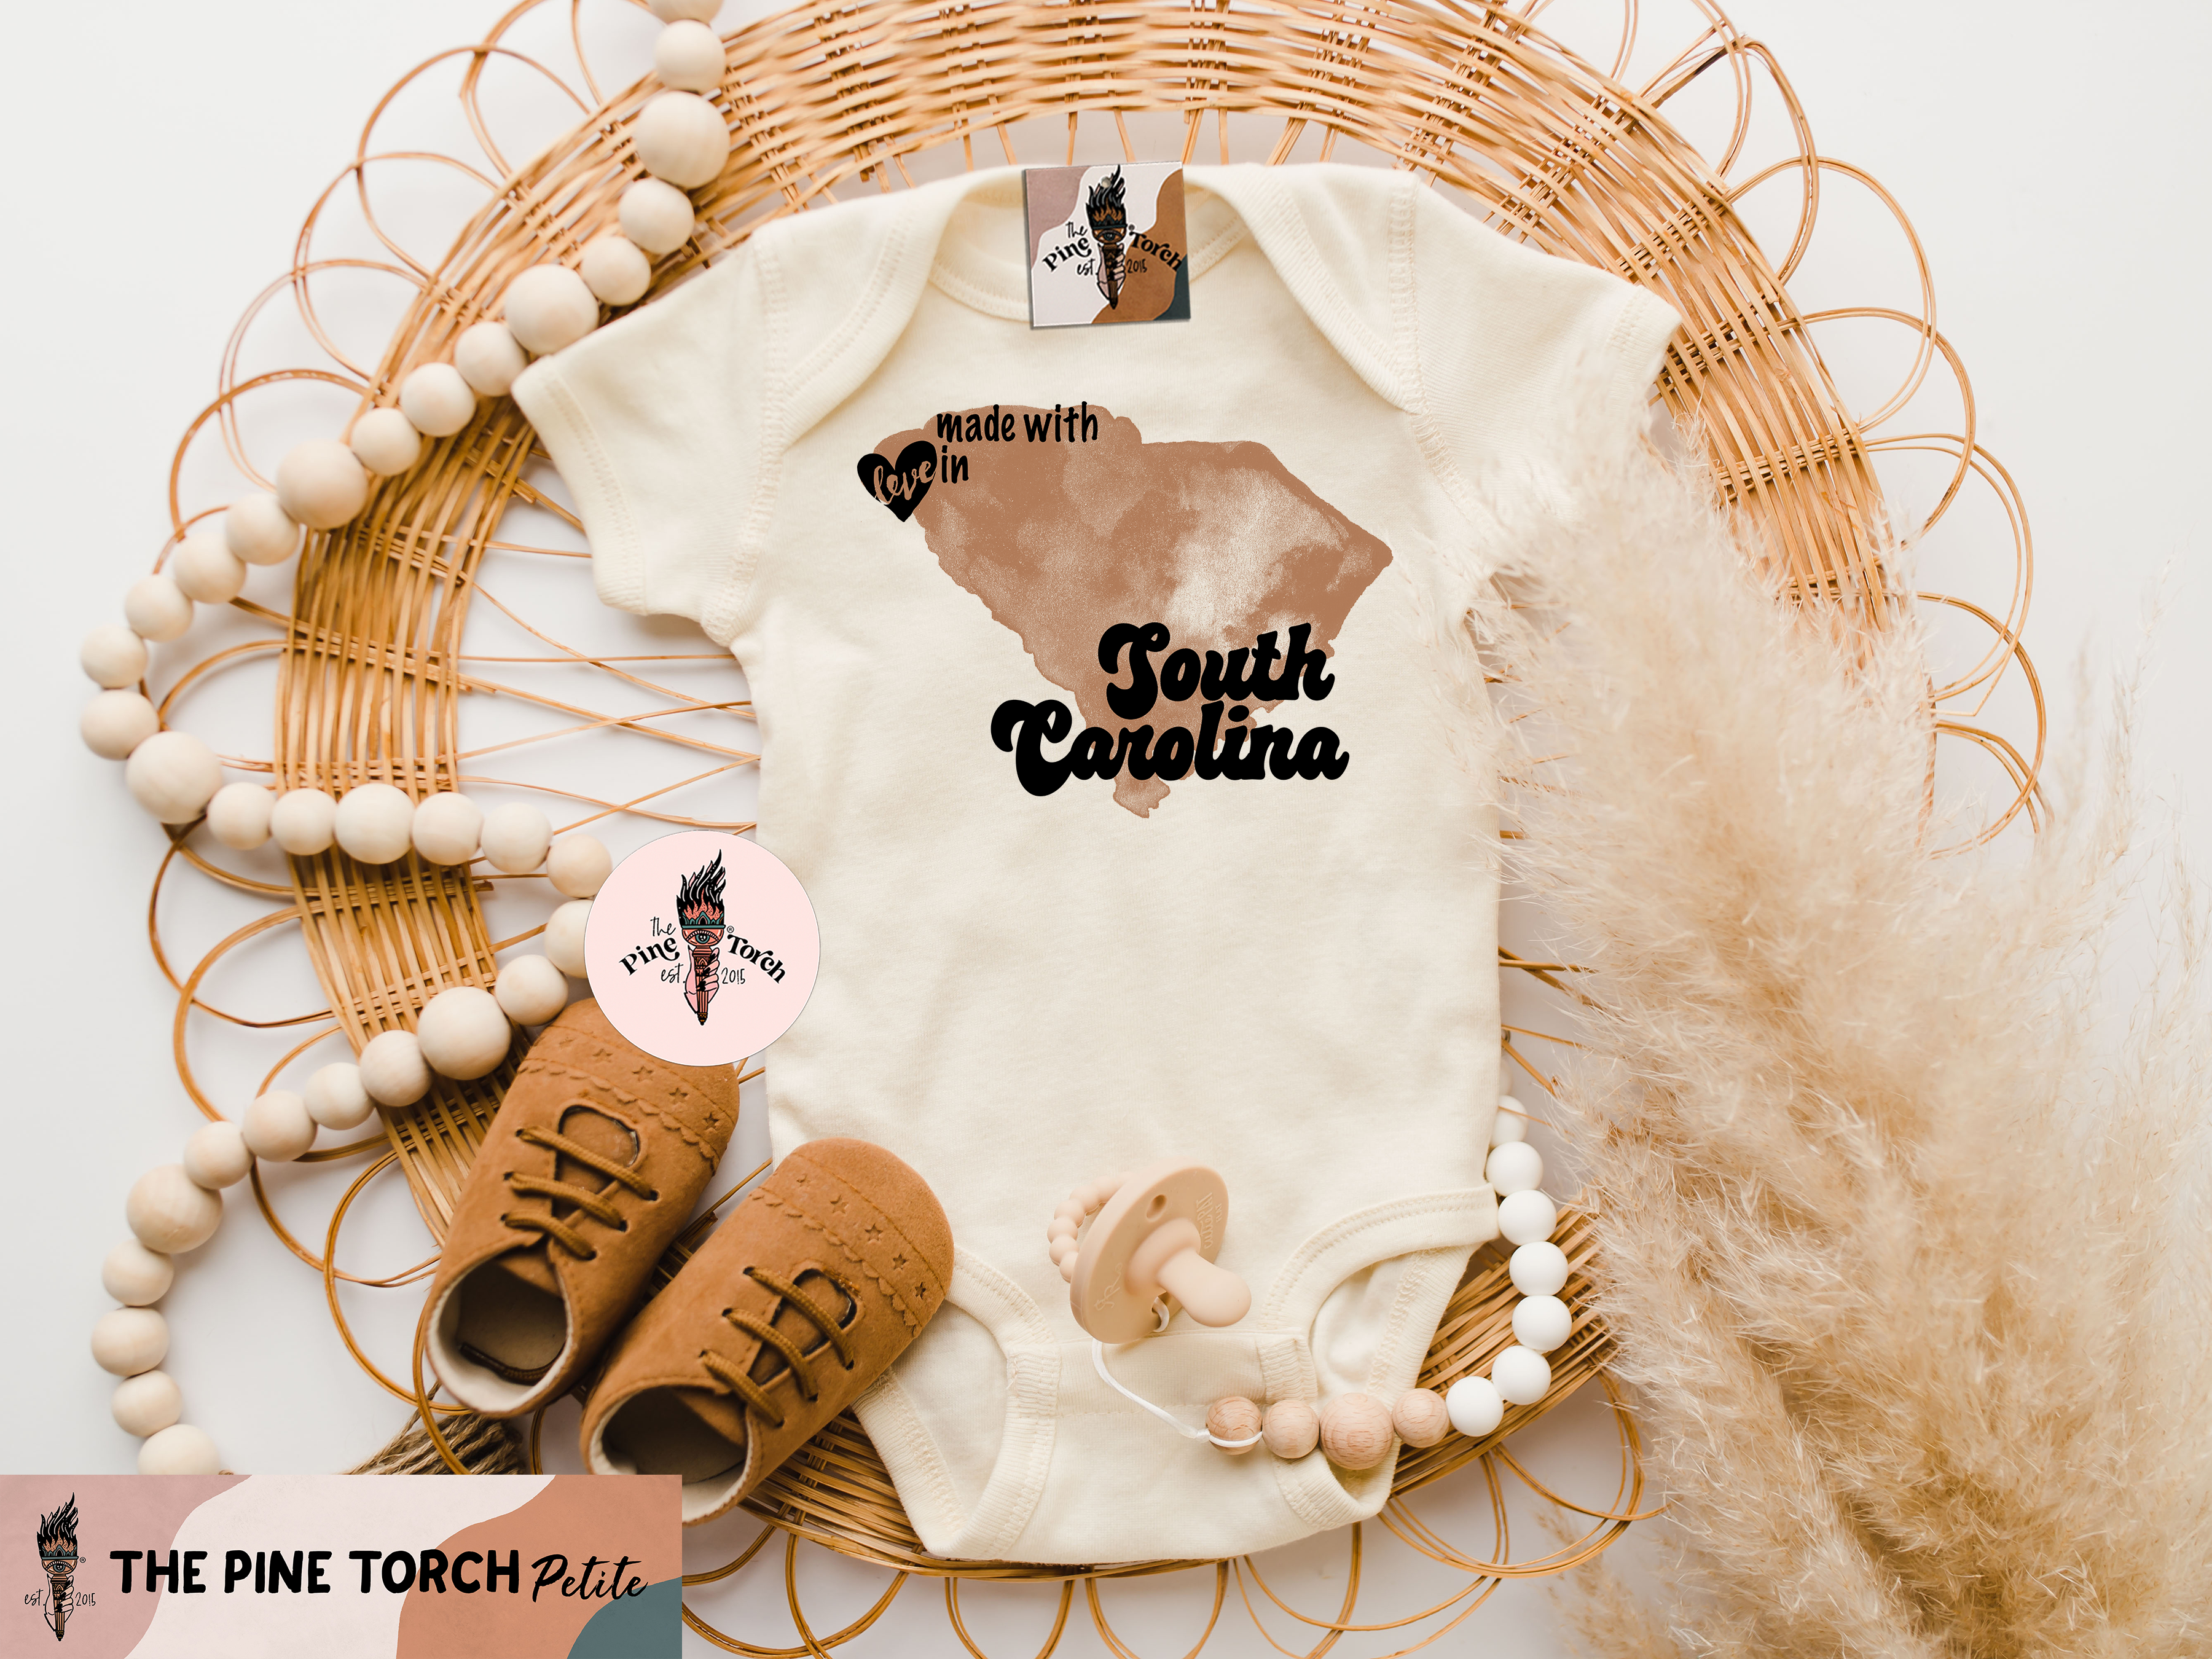 « MADE WITH LOVE IN SOUTH CAROLINA » BODYSUIT